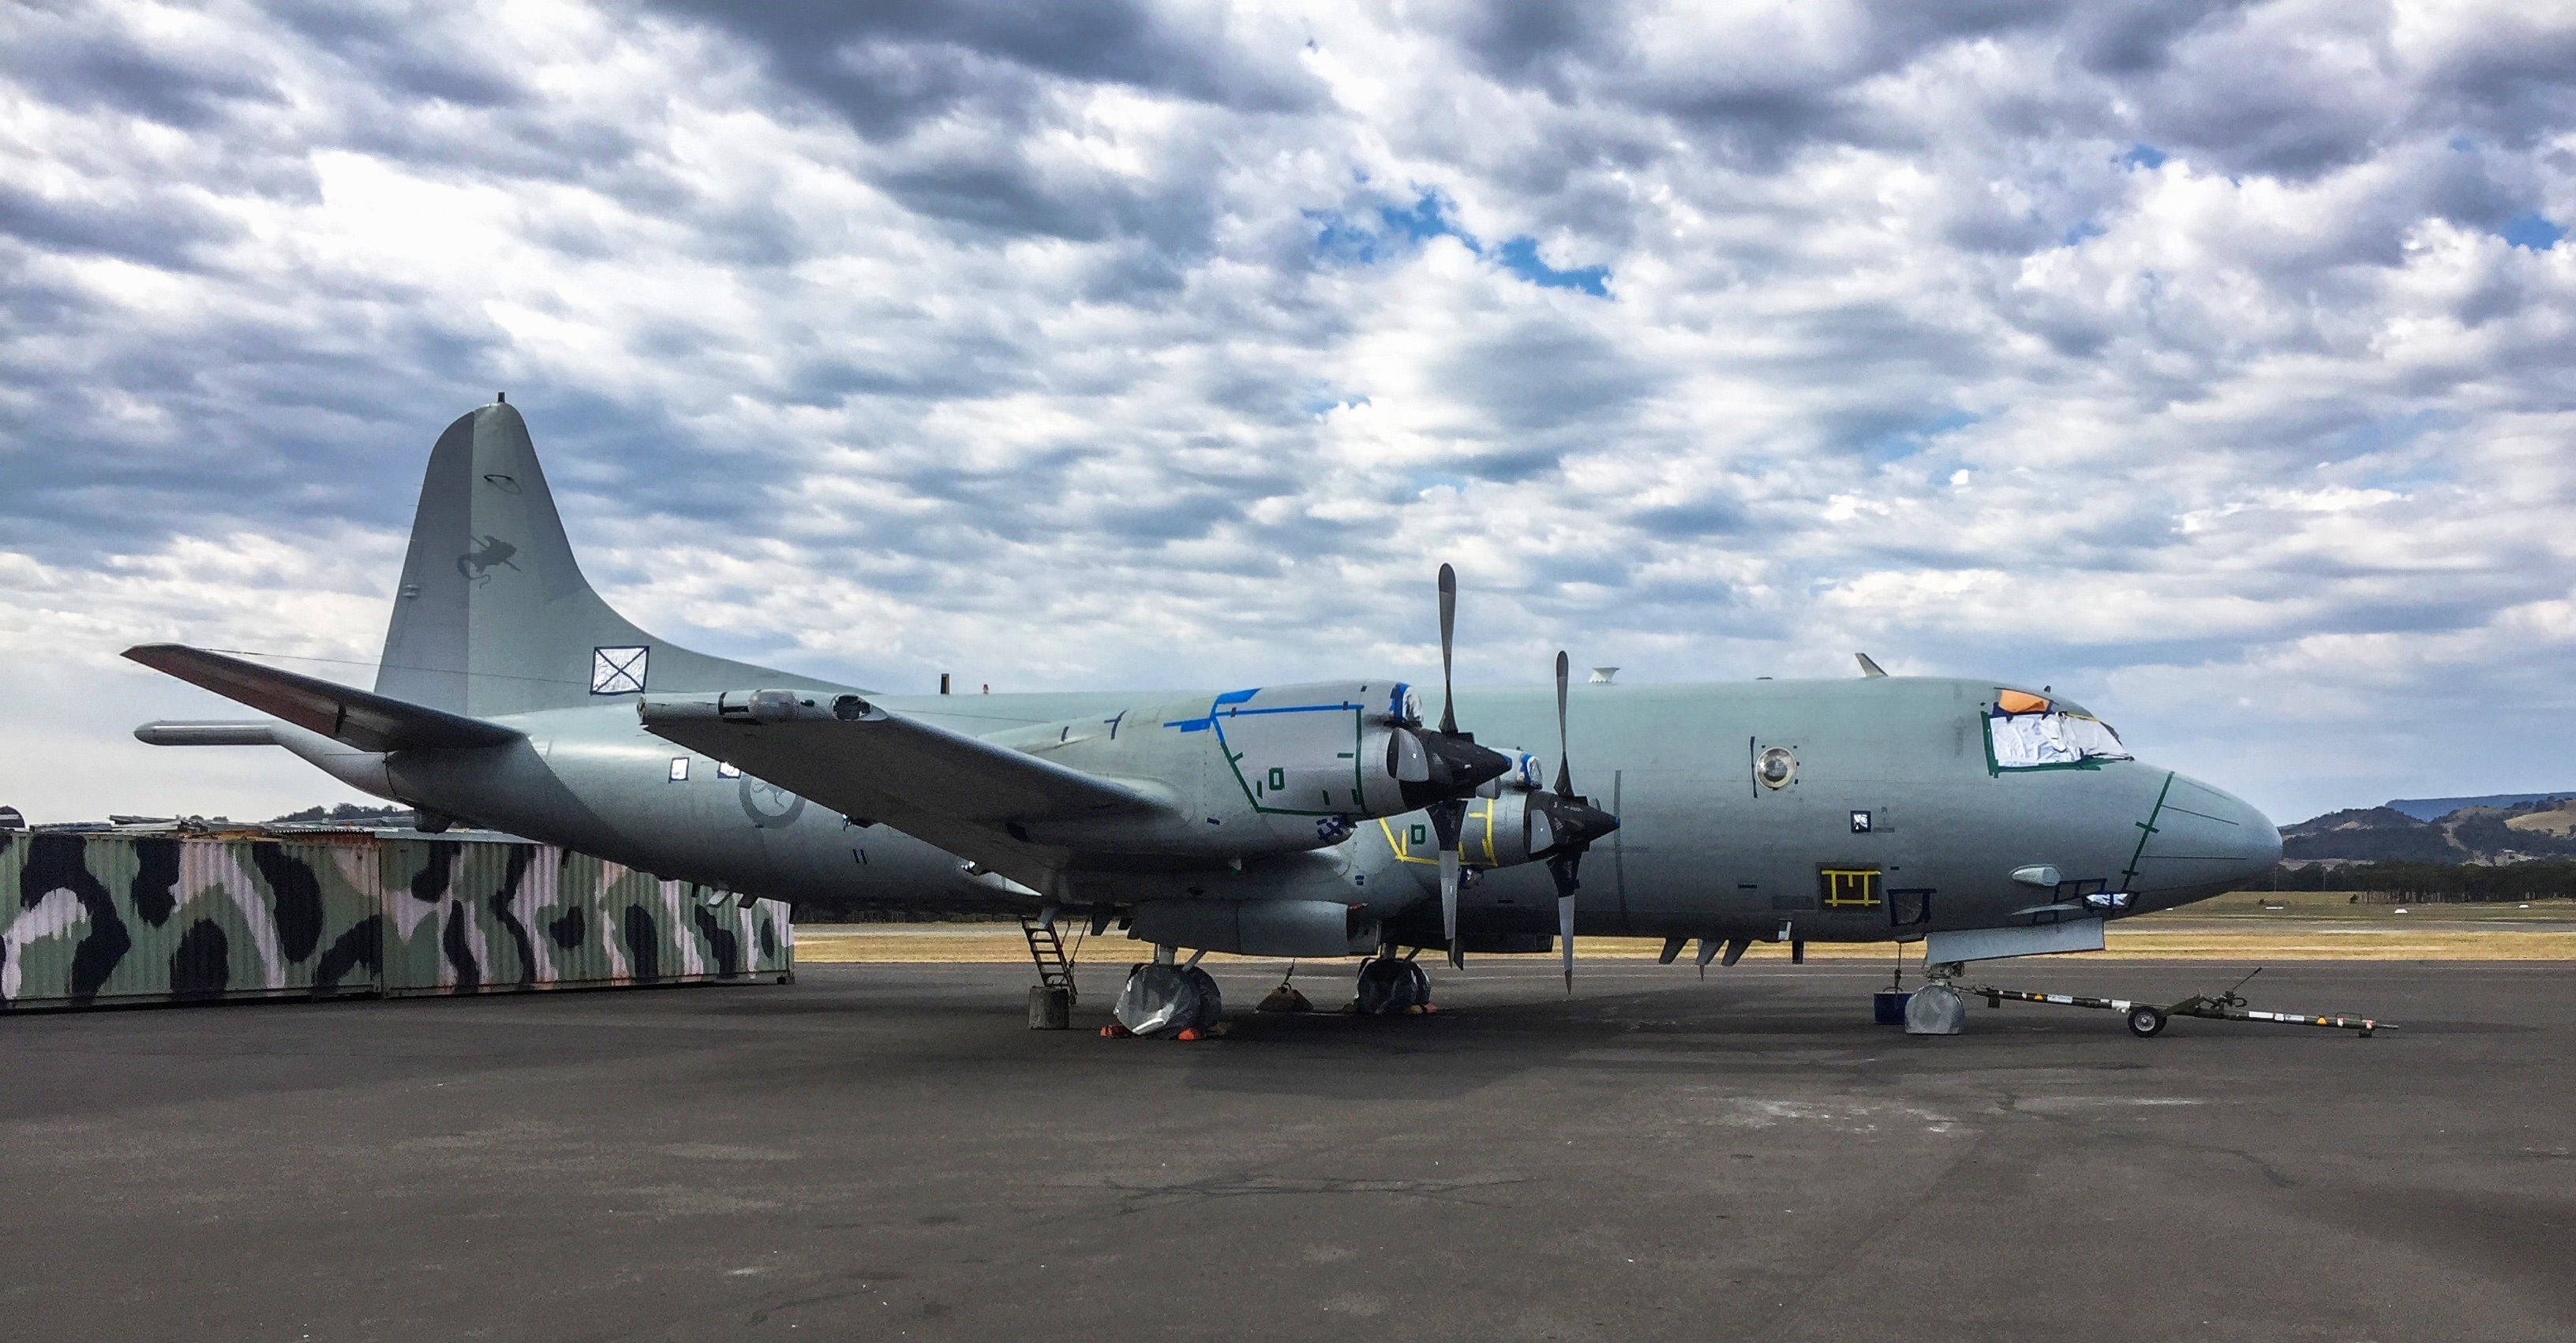 HARS AP-3C Orion on the ramp at the museum. The aircraft is currently inhibited to prevent moisture getting in to sensitive areas, but will receive a thorough going over in preparations for flying again in the coming months. (photo via HARS)